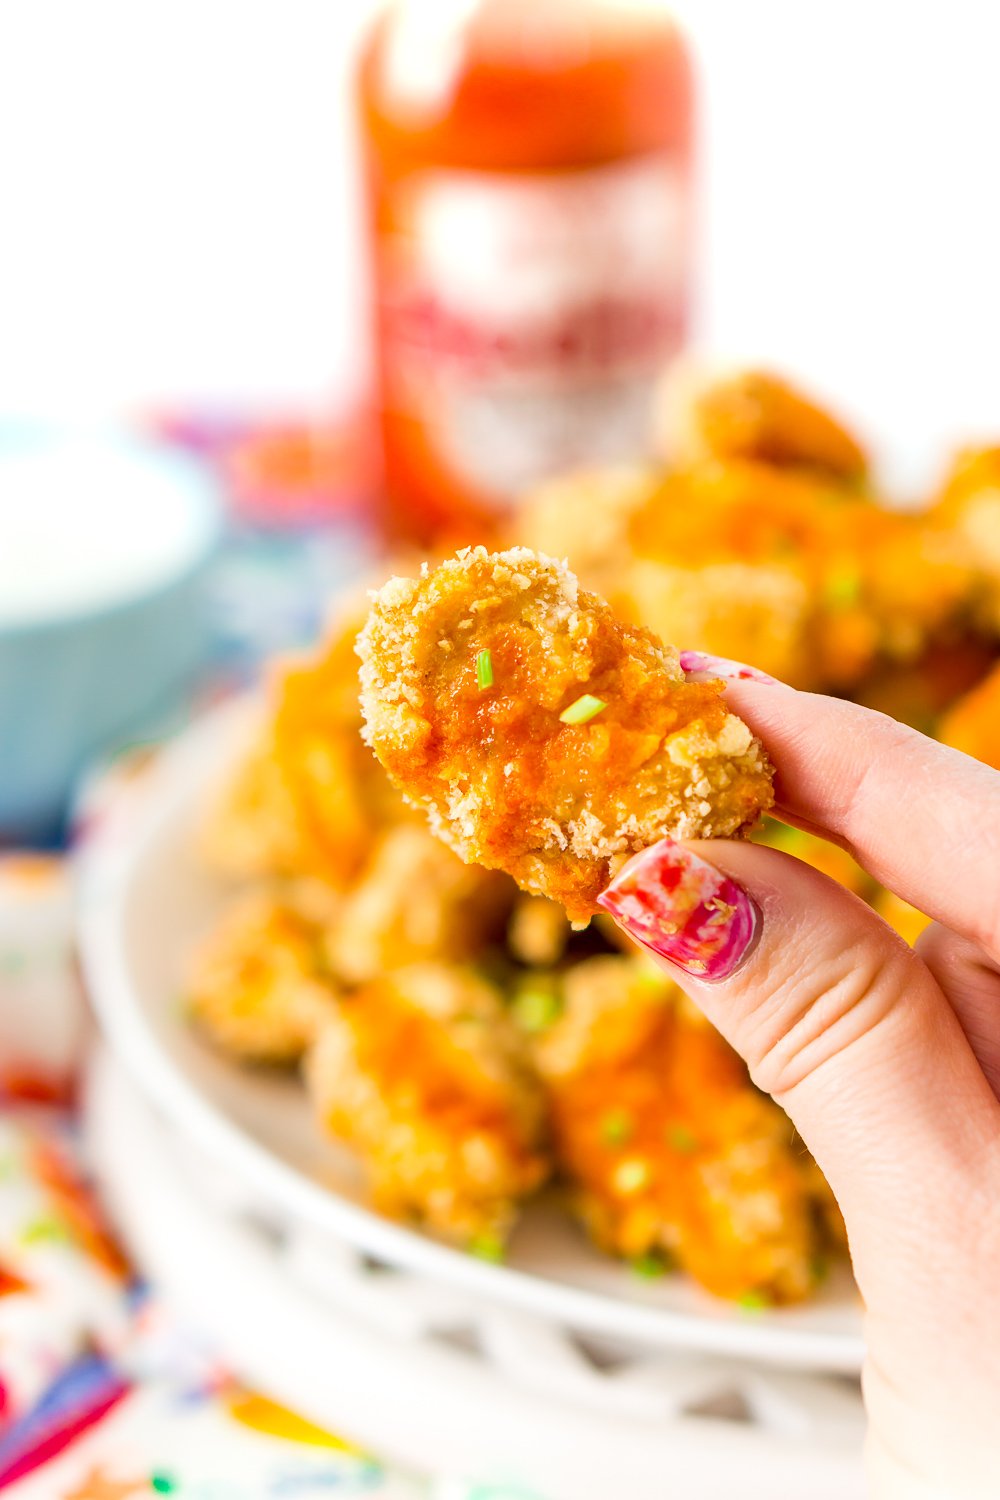 Woman's fingers holding Crispy Baked Chicken wing with buffalo sauce.